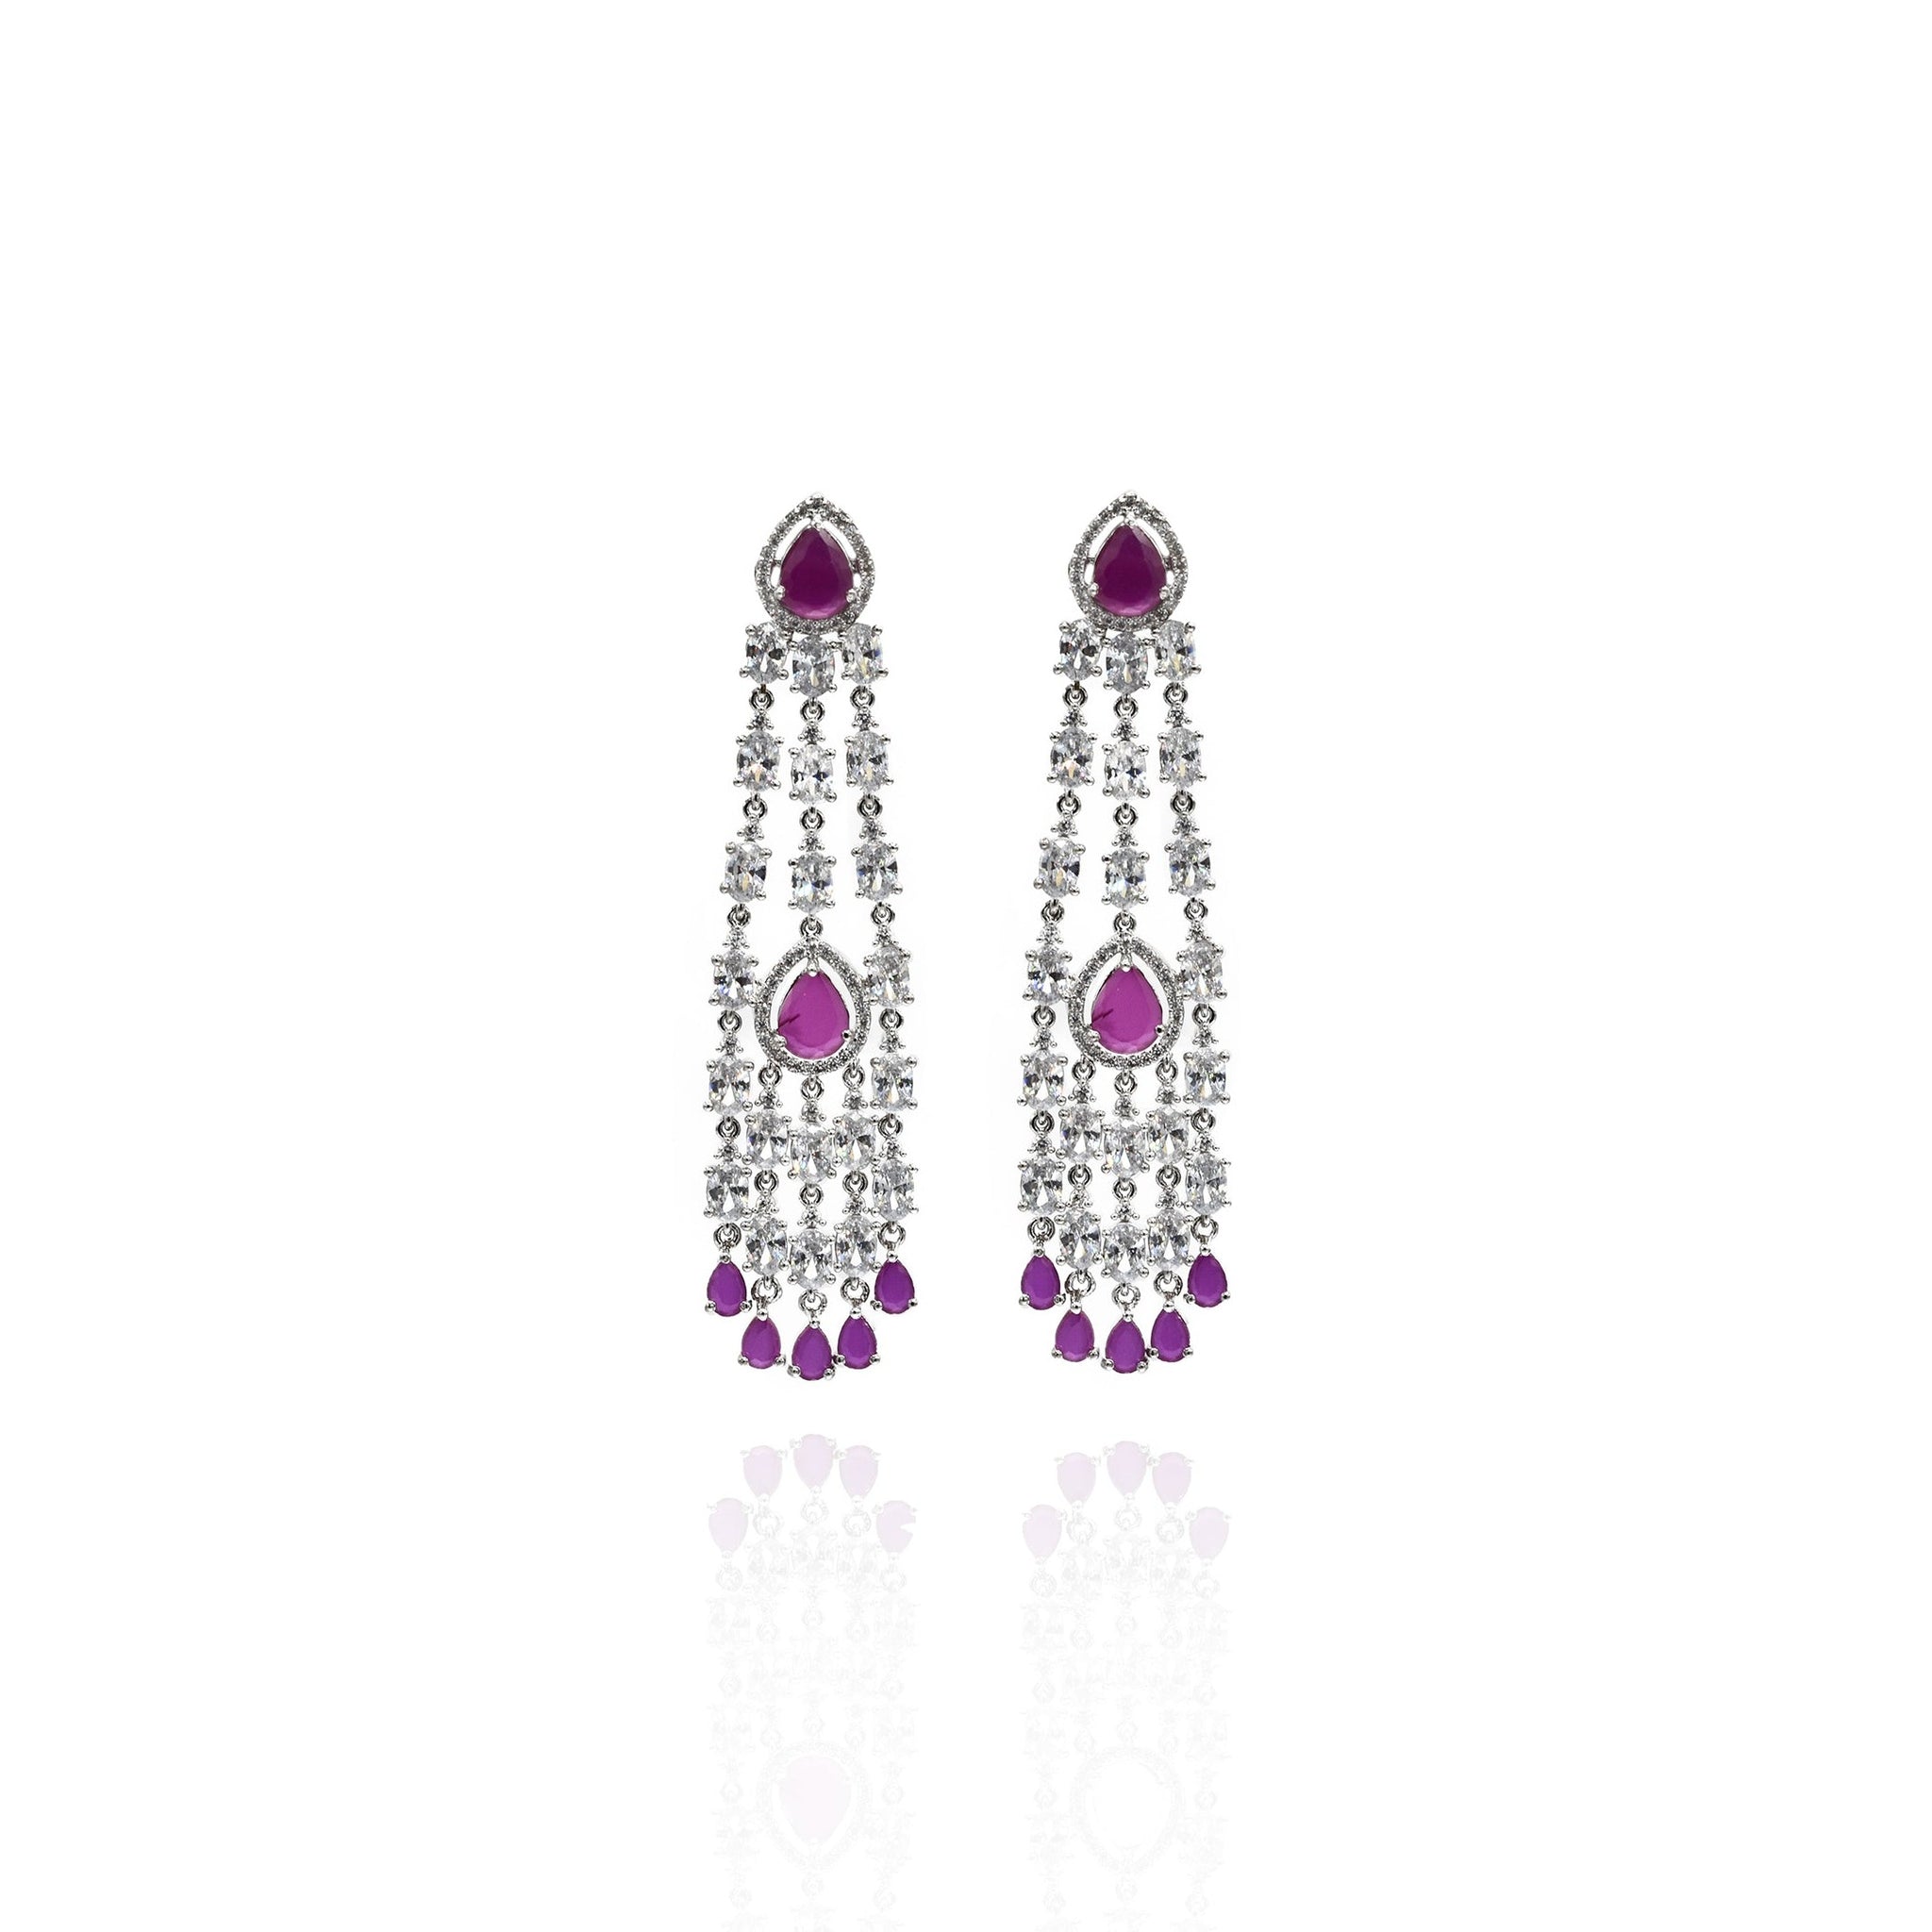 Fiza AD Earrings Pink - The Pashm